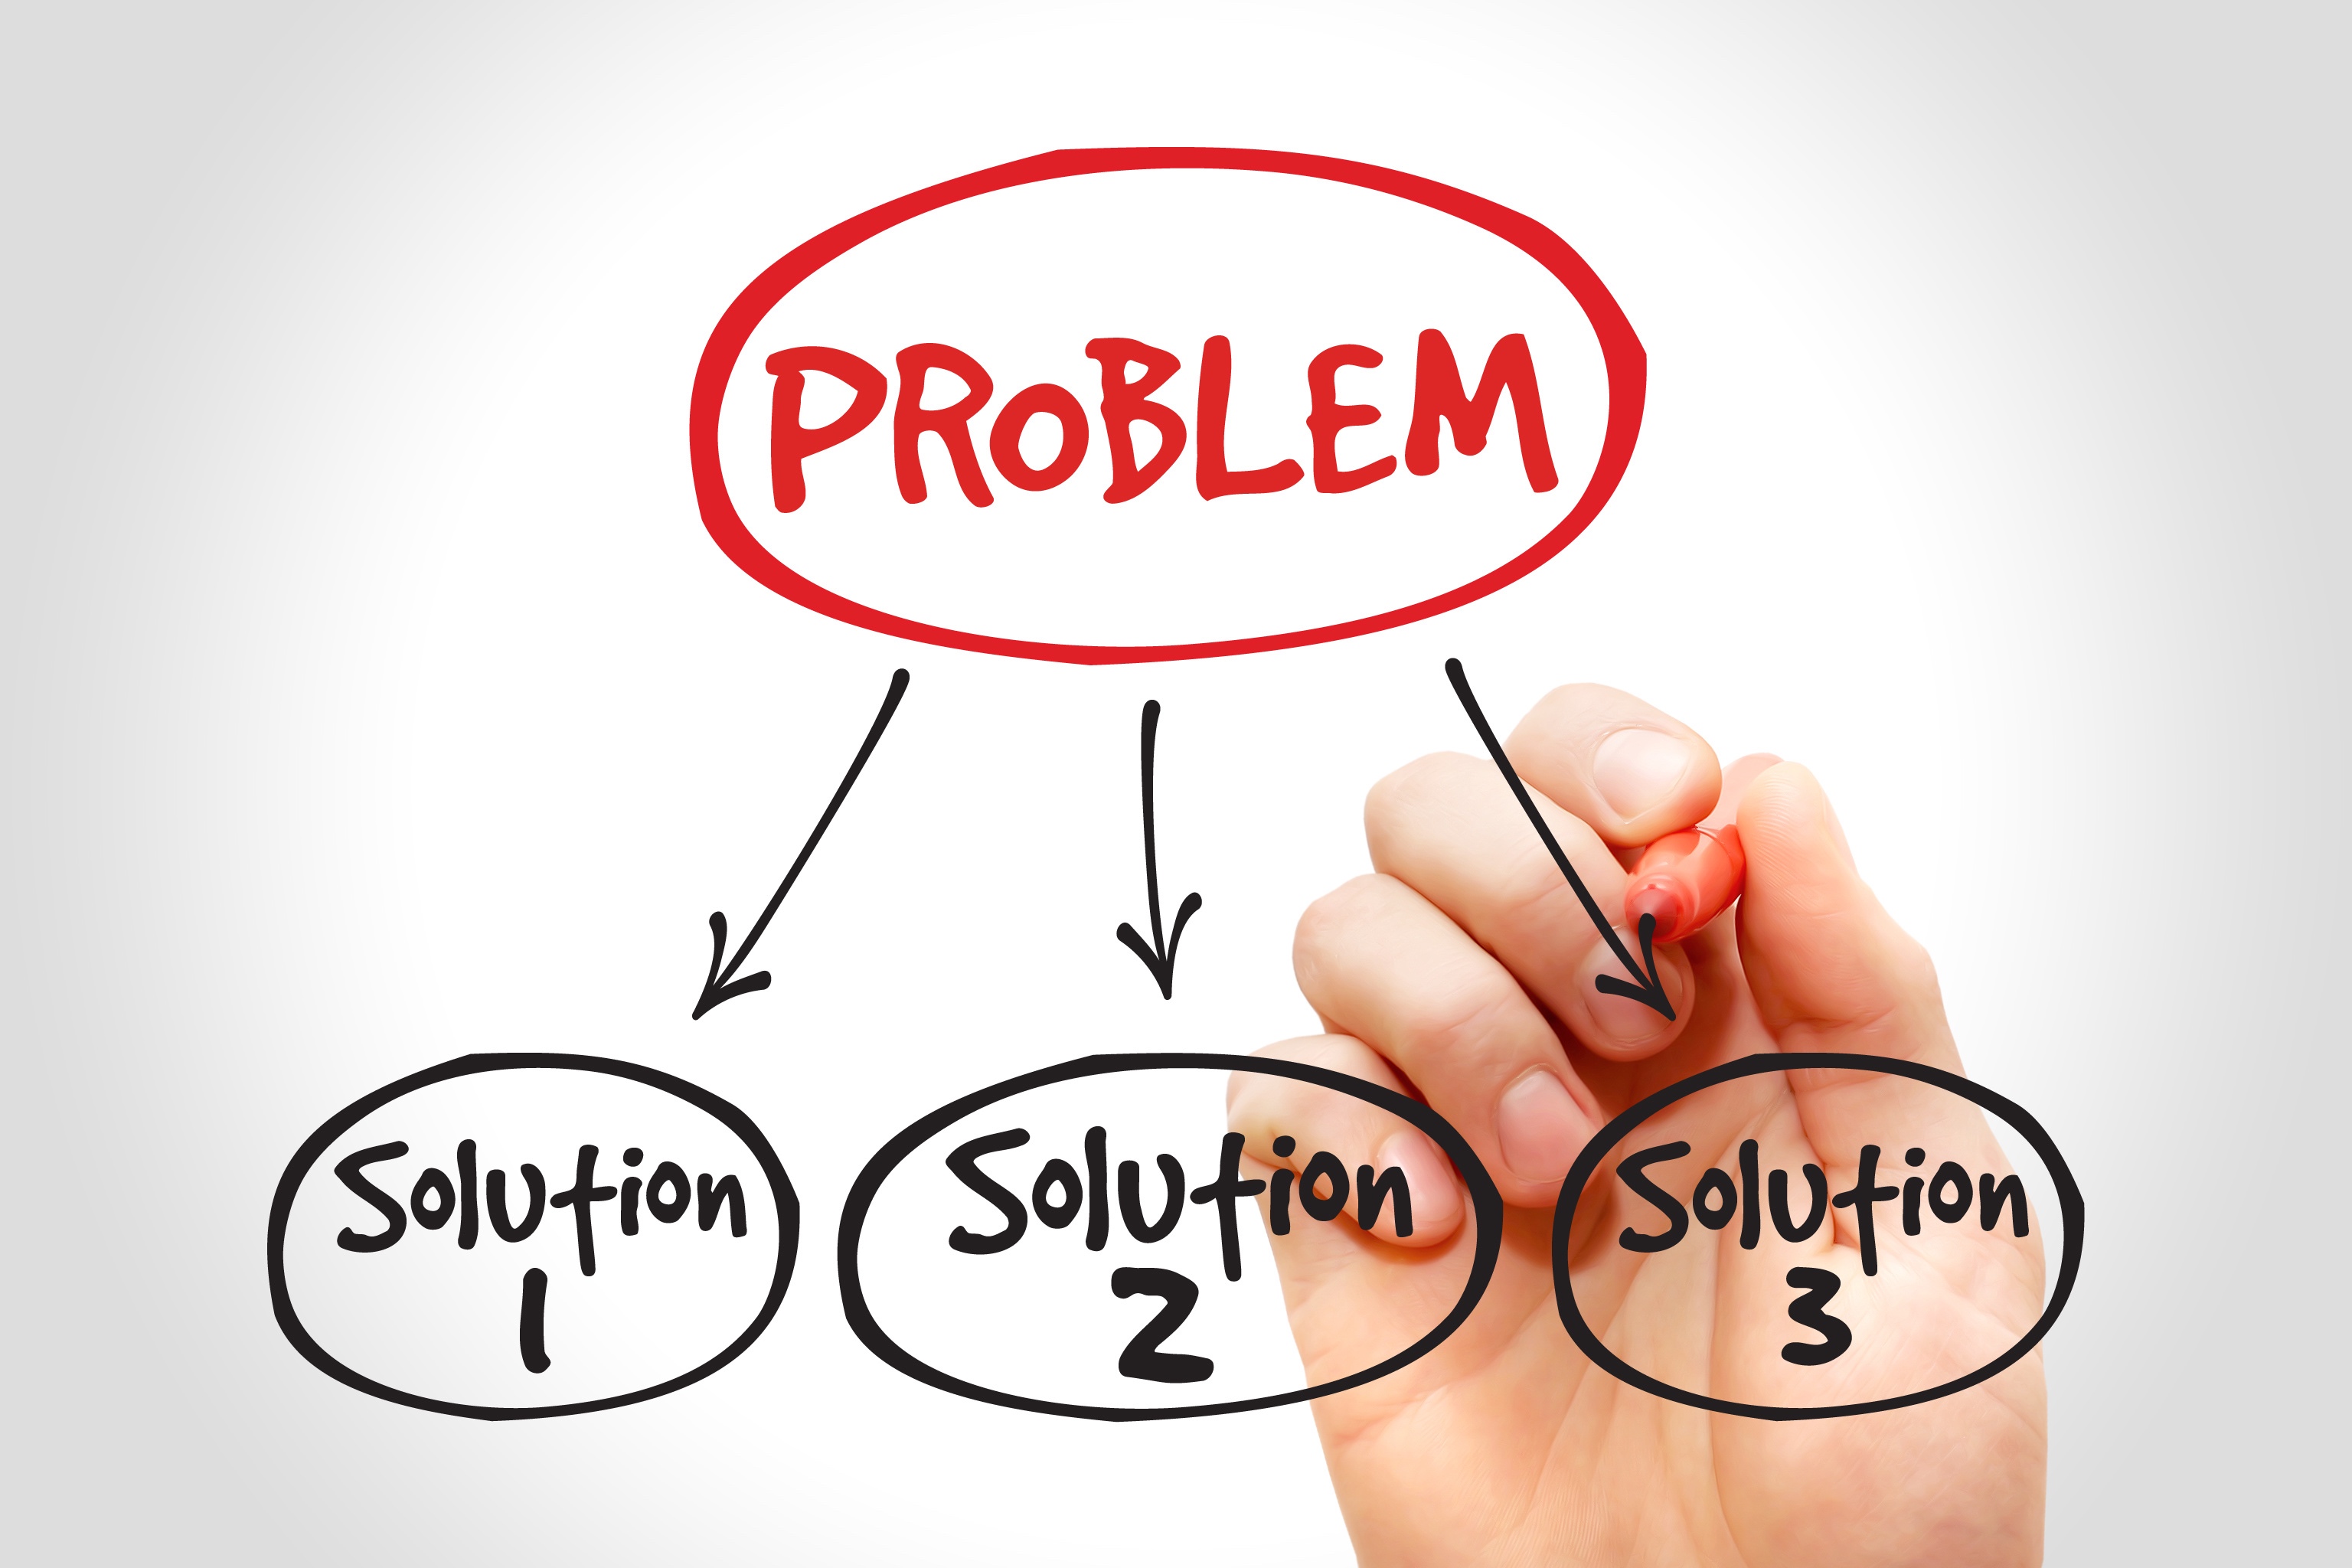 is the ability to solve problems